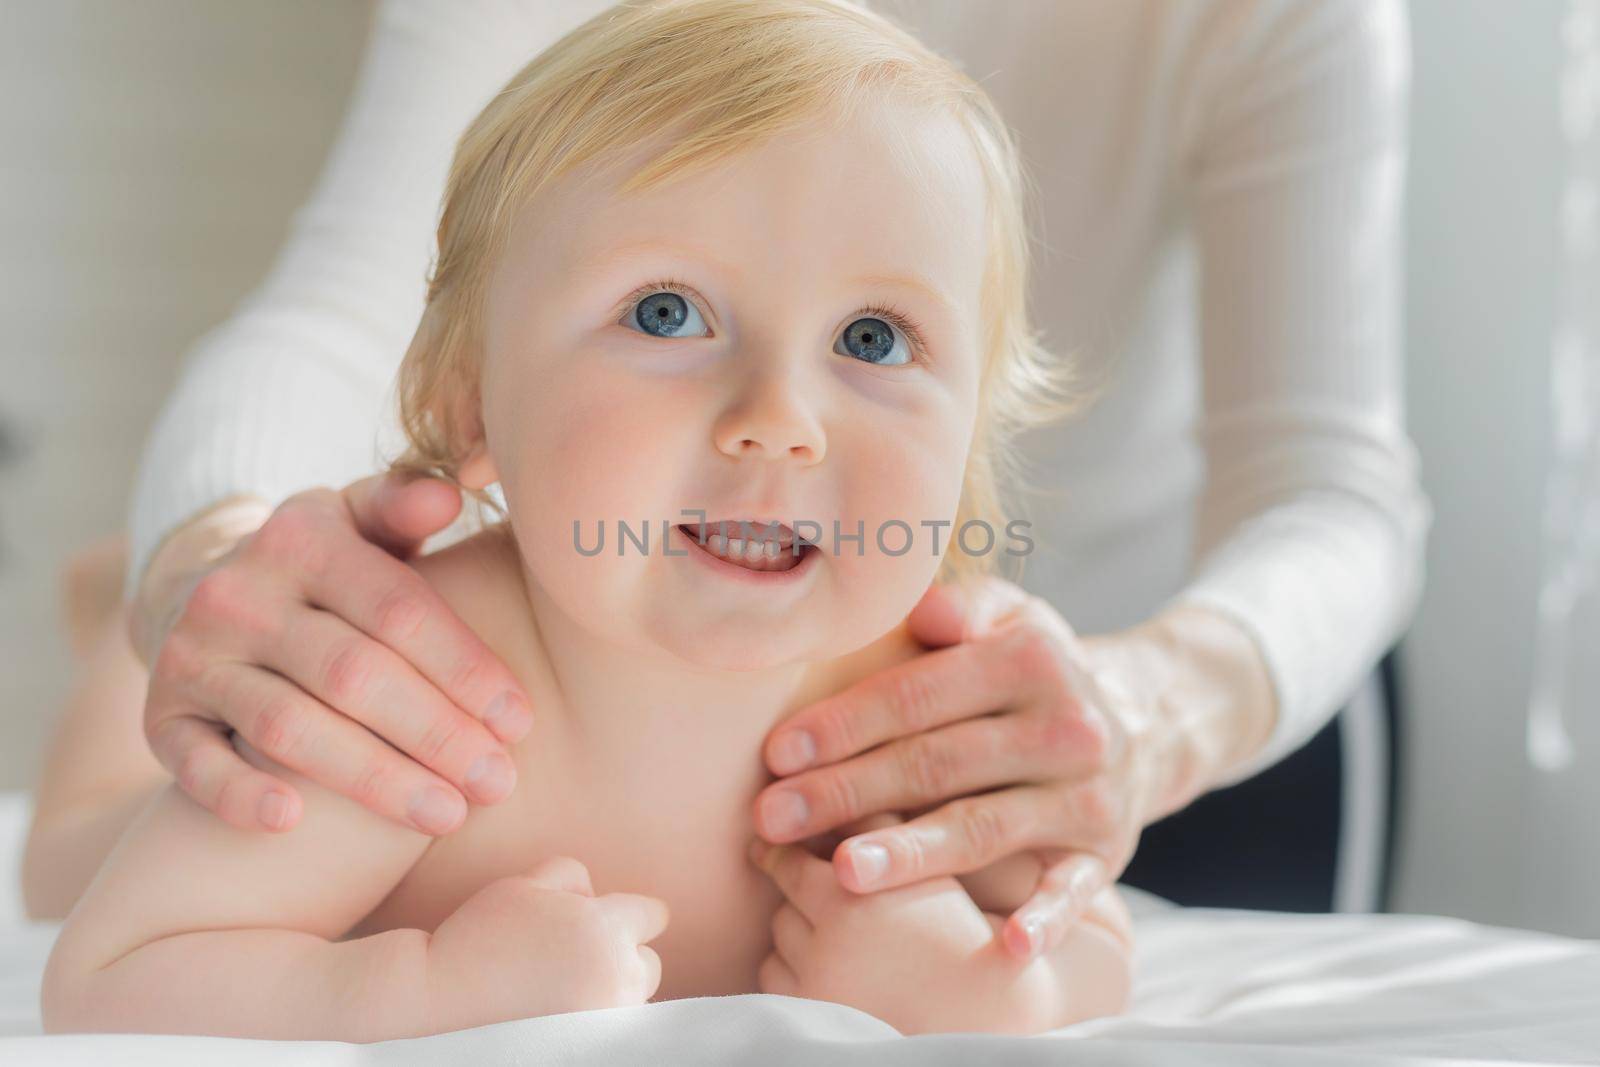 Mom gives her baby a shoulder and back massage. Close-up. A satisfied baby lies on the massage table.